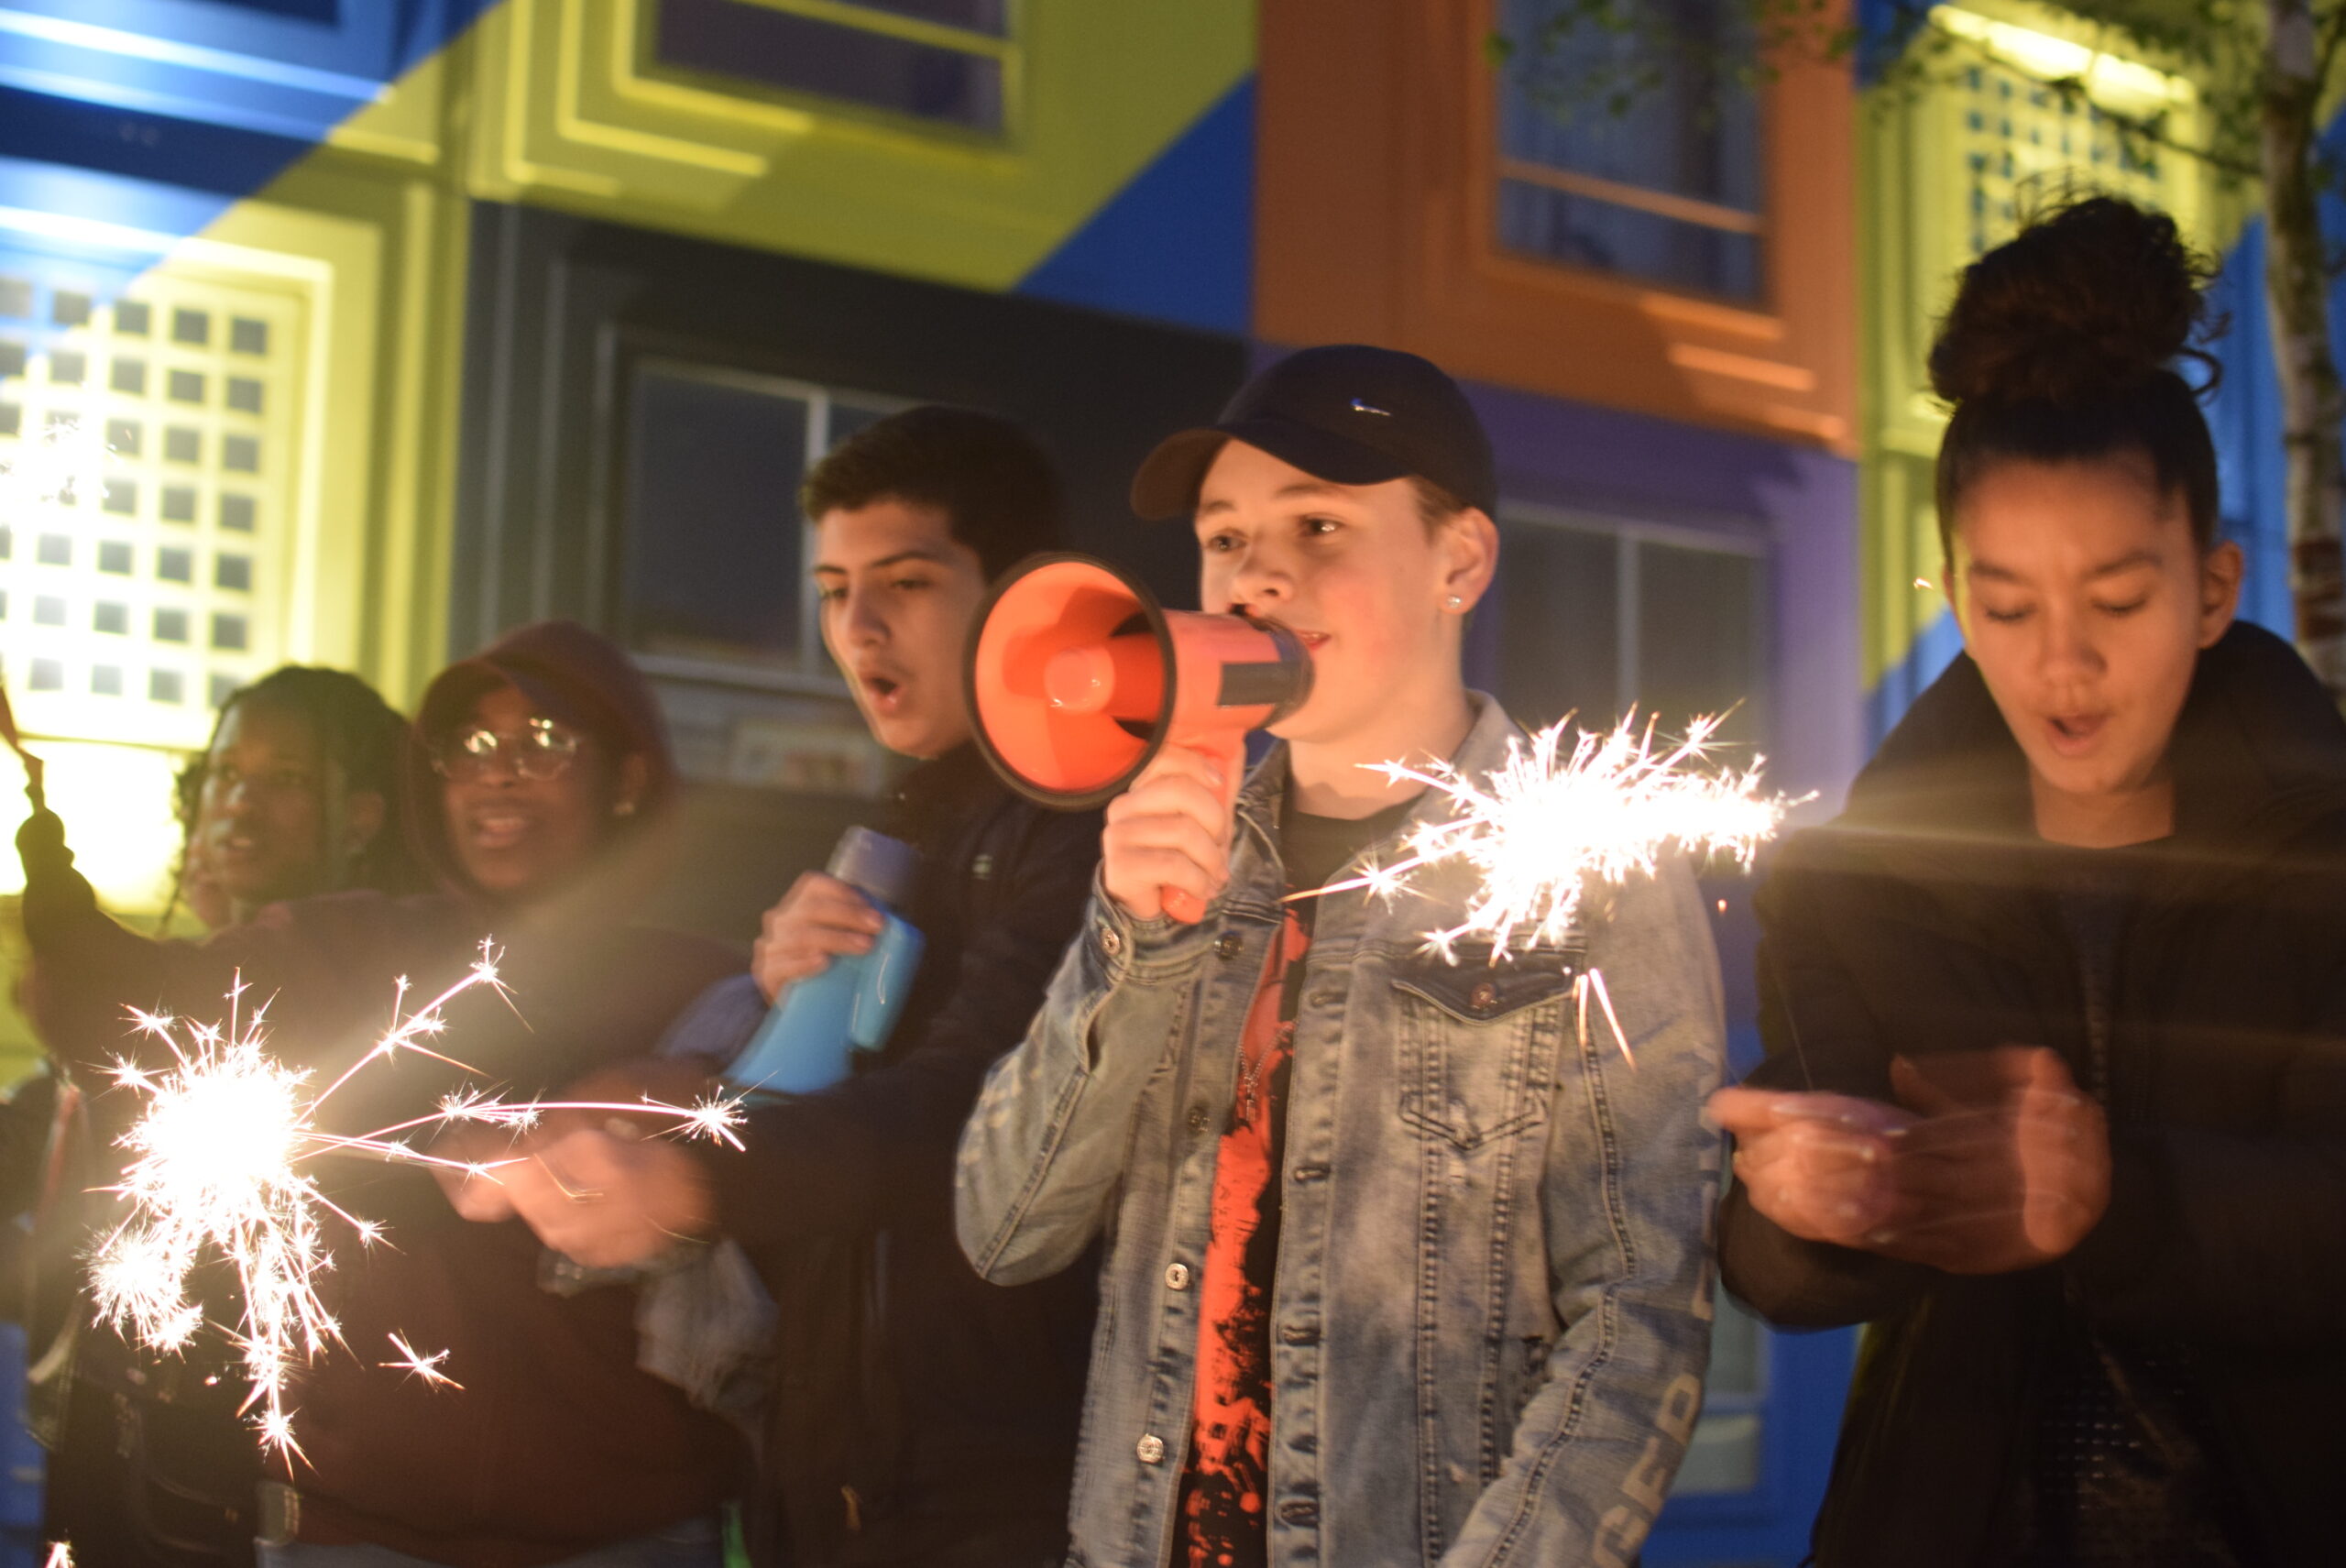 A group of teenagers stands together, some holding fire crackers and one holding a loud speaker.